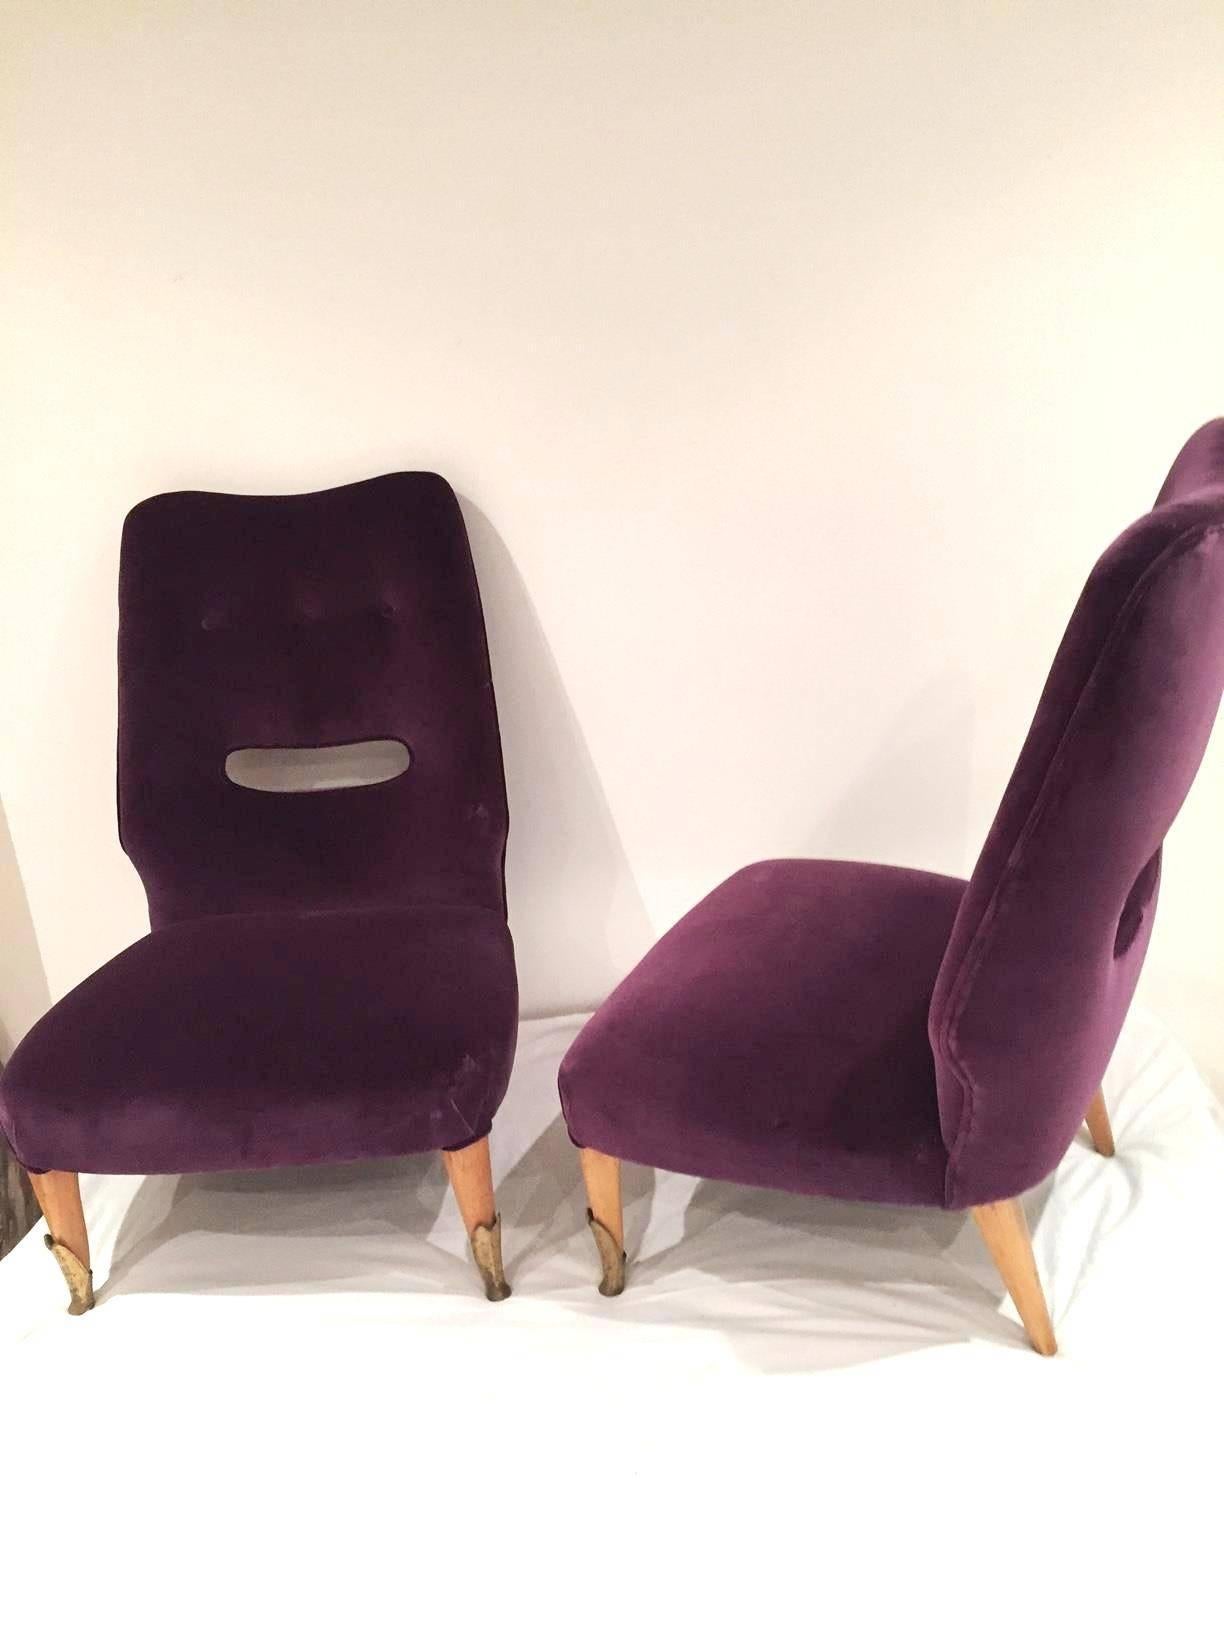 A pair of Italian, 1950s elegant side chairs, with a hole in the rest back, with the light polished feet and the brass sabot, reupholstered in purple velvet.